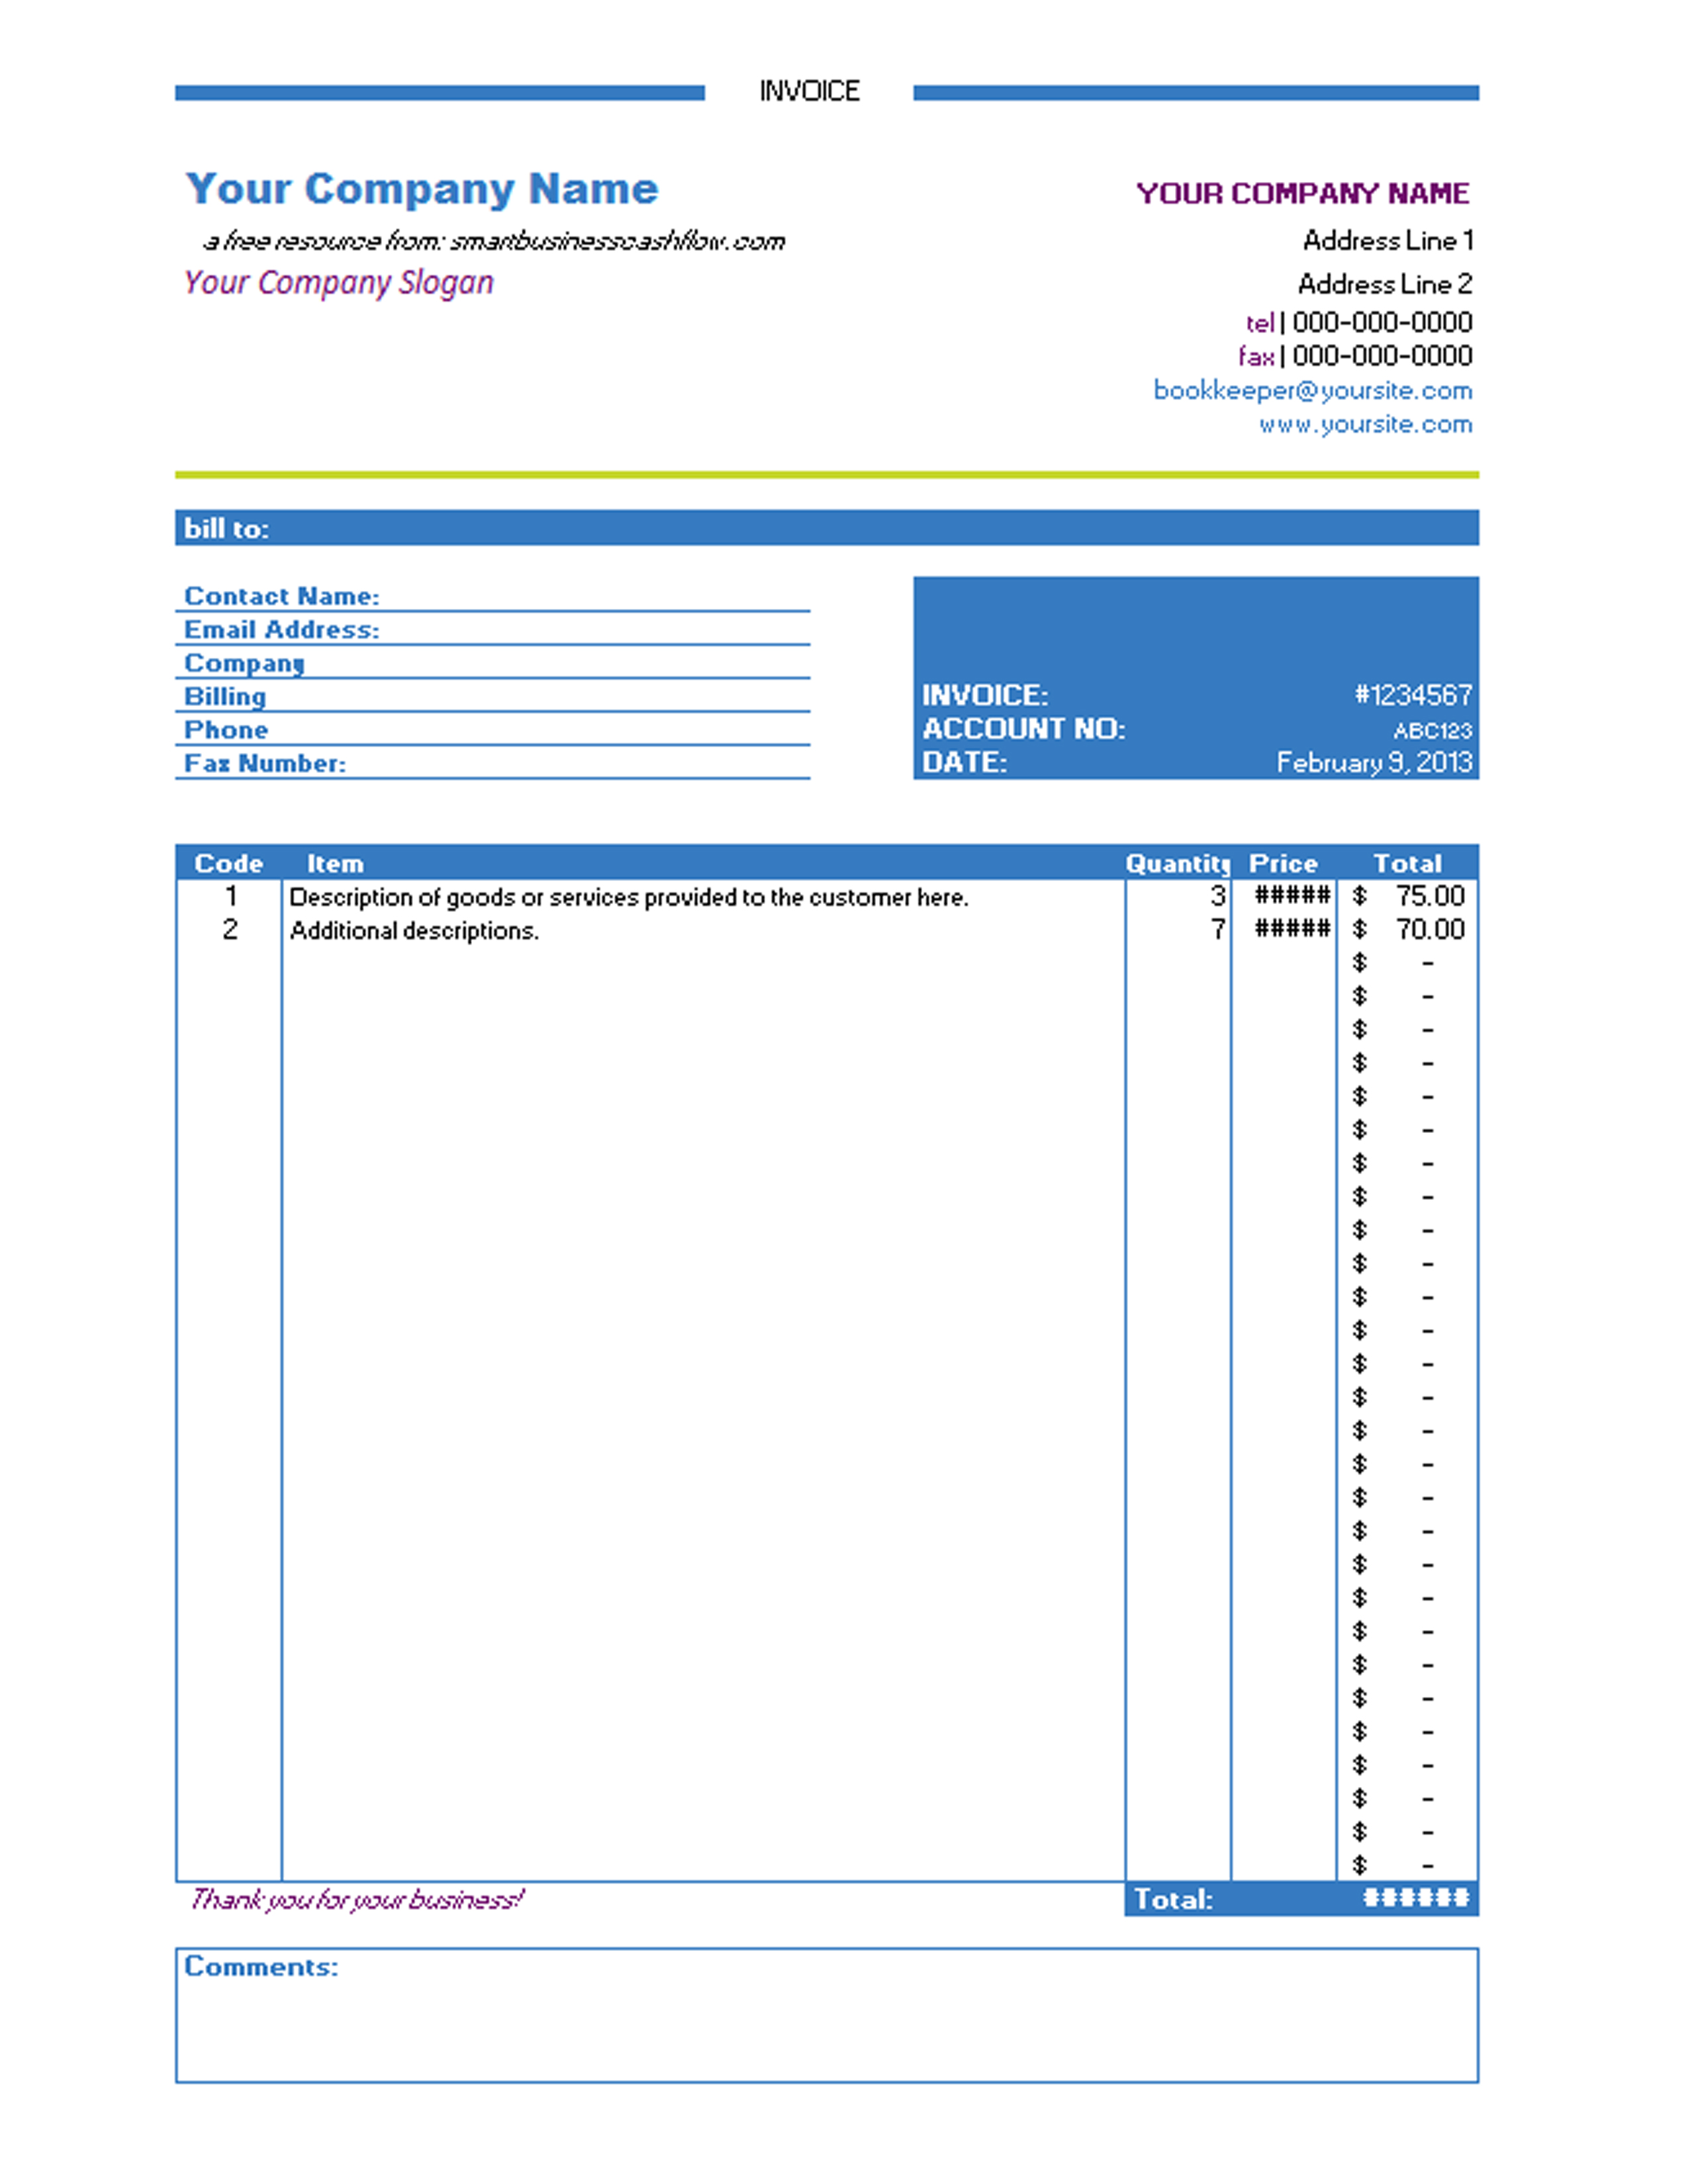 subcontractor-invoice-template-excel-invoice-example